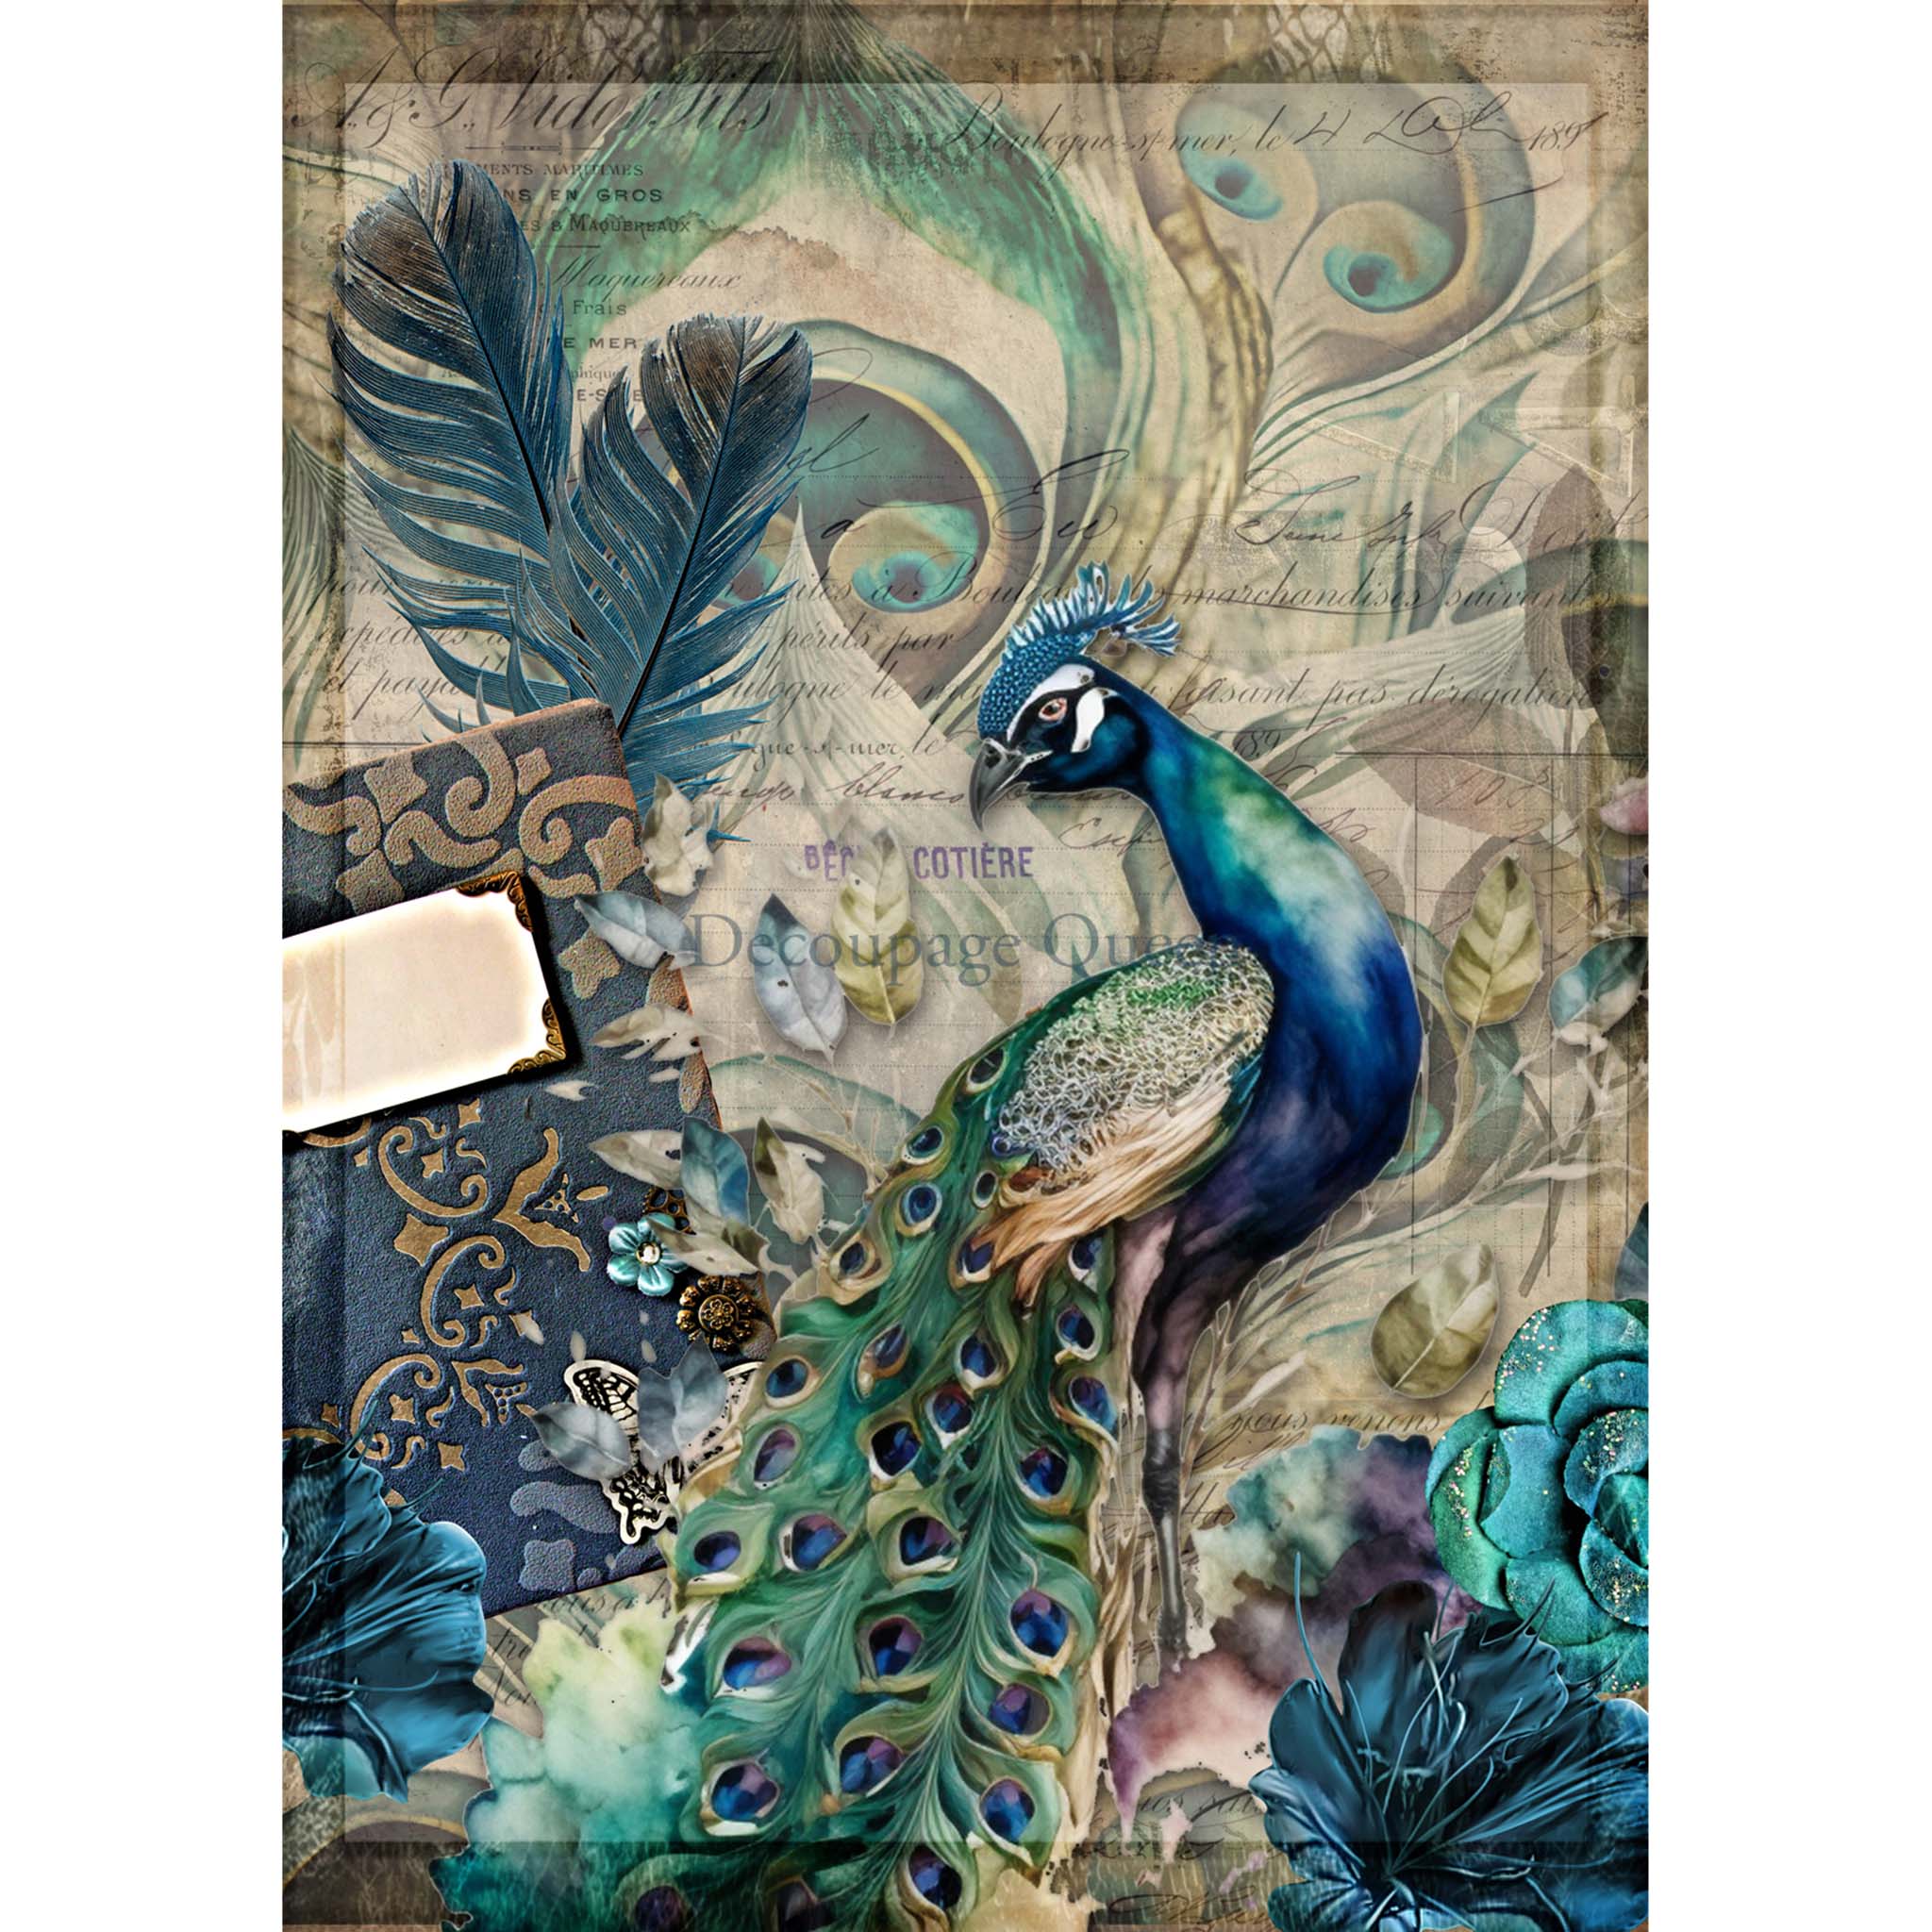 A2 rice paper design that features a vintage document adorned with a majestic peacock and delicate florals. White borders are on the sides.